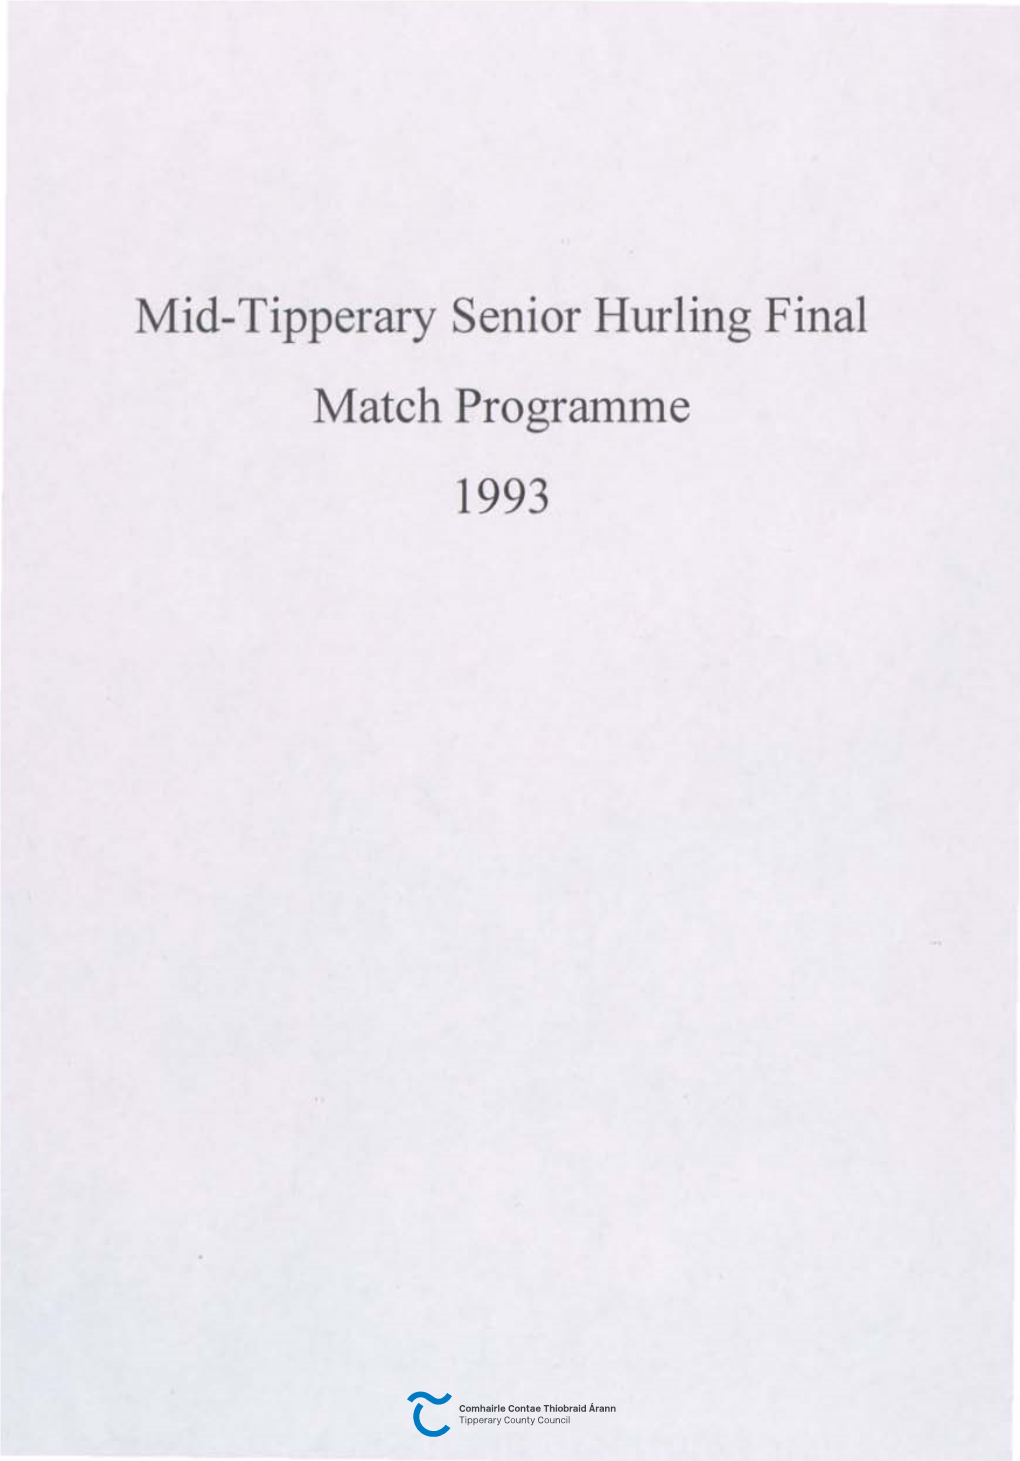 Mid-Tipperary Senior Hurling Final Match Programme 1993 on Sunday 15Th